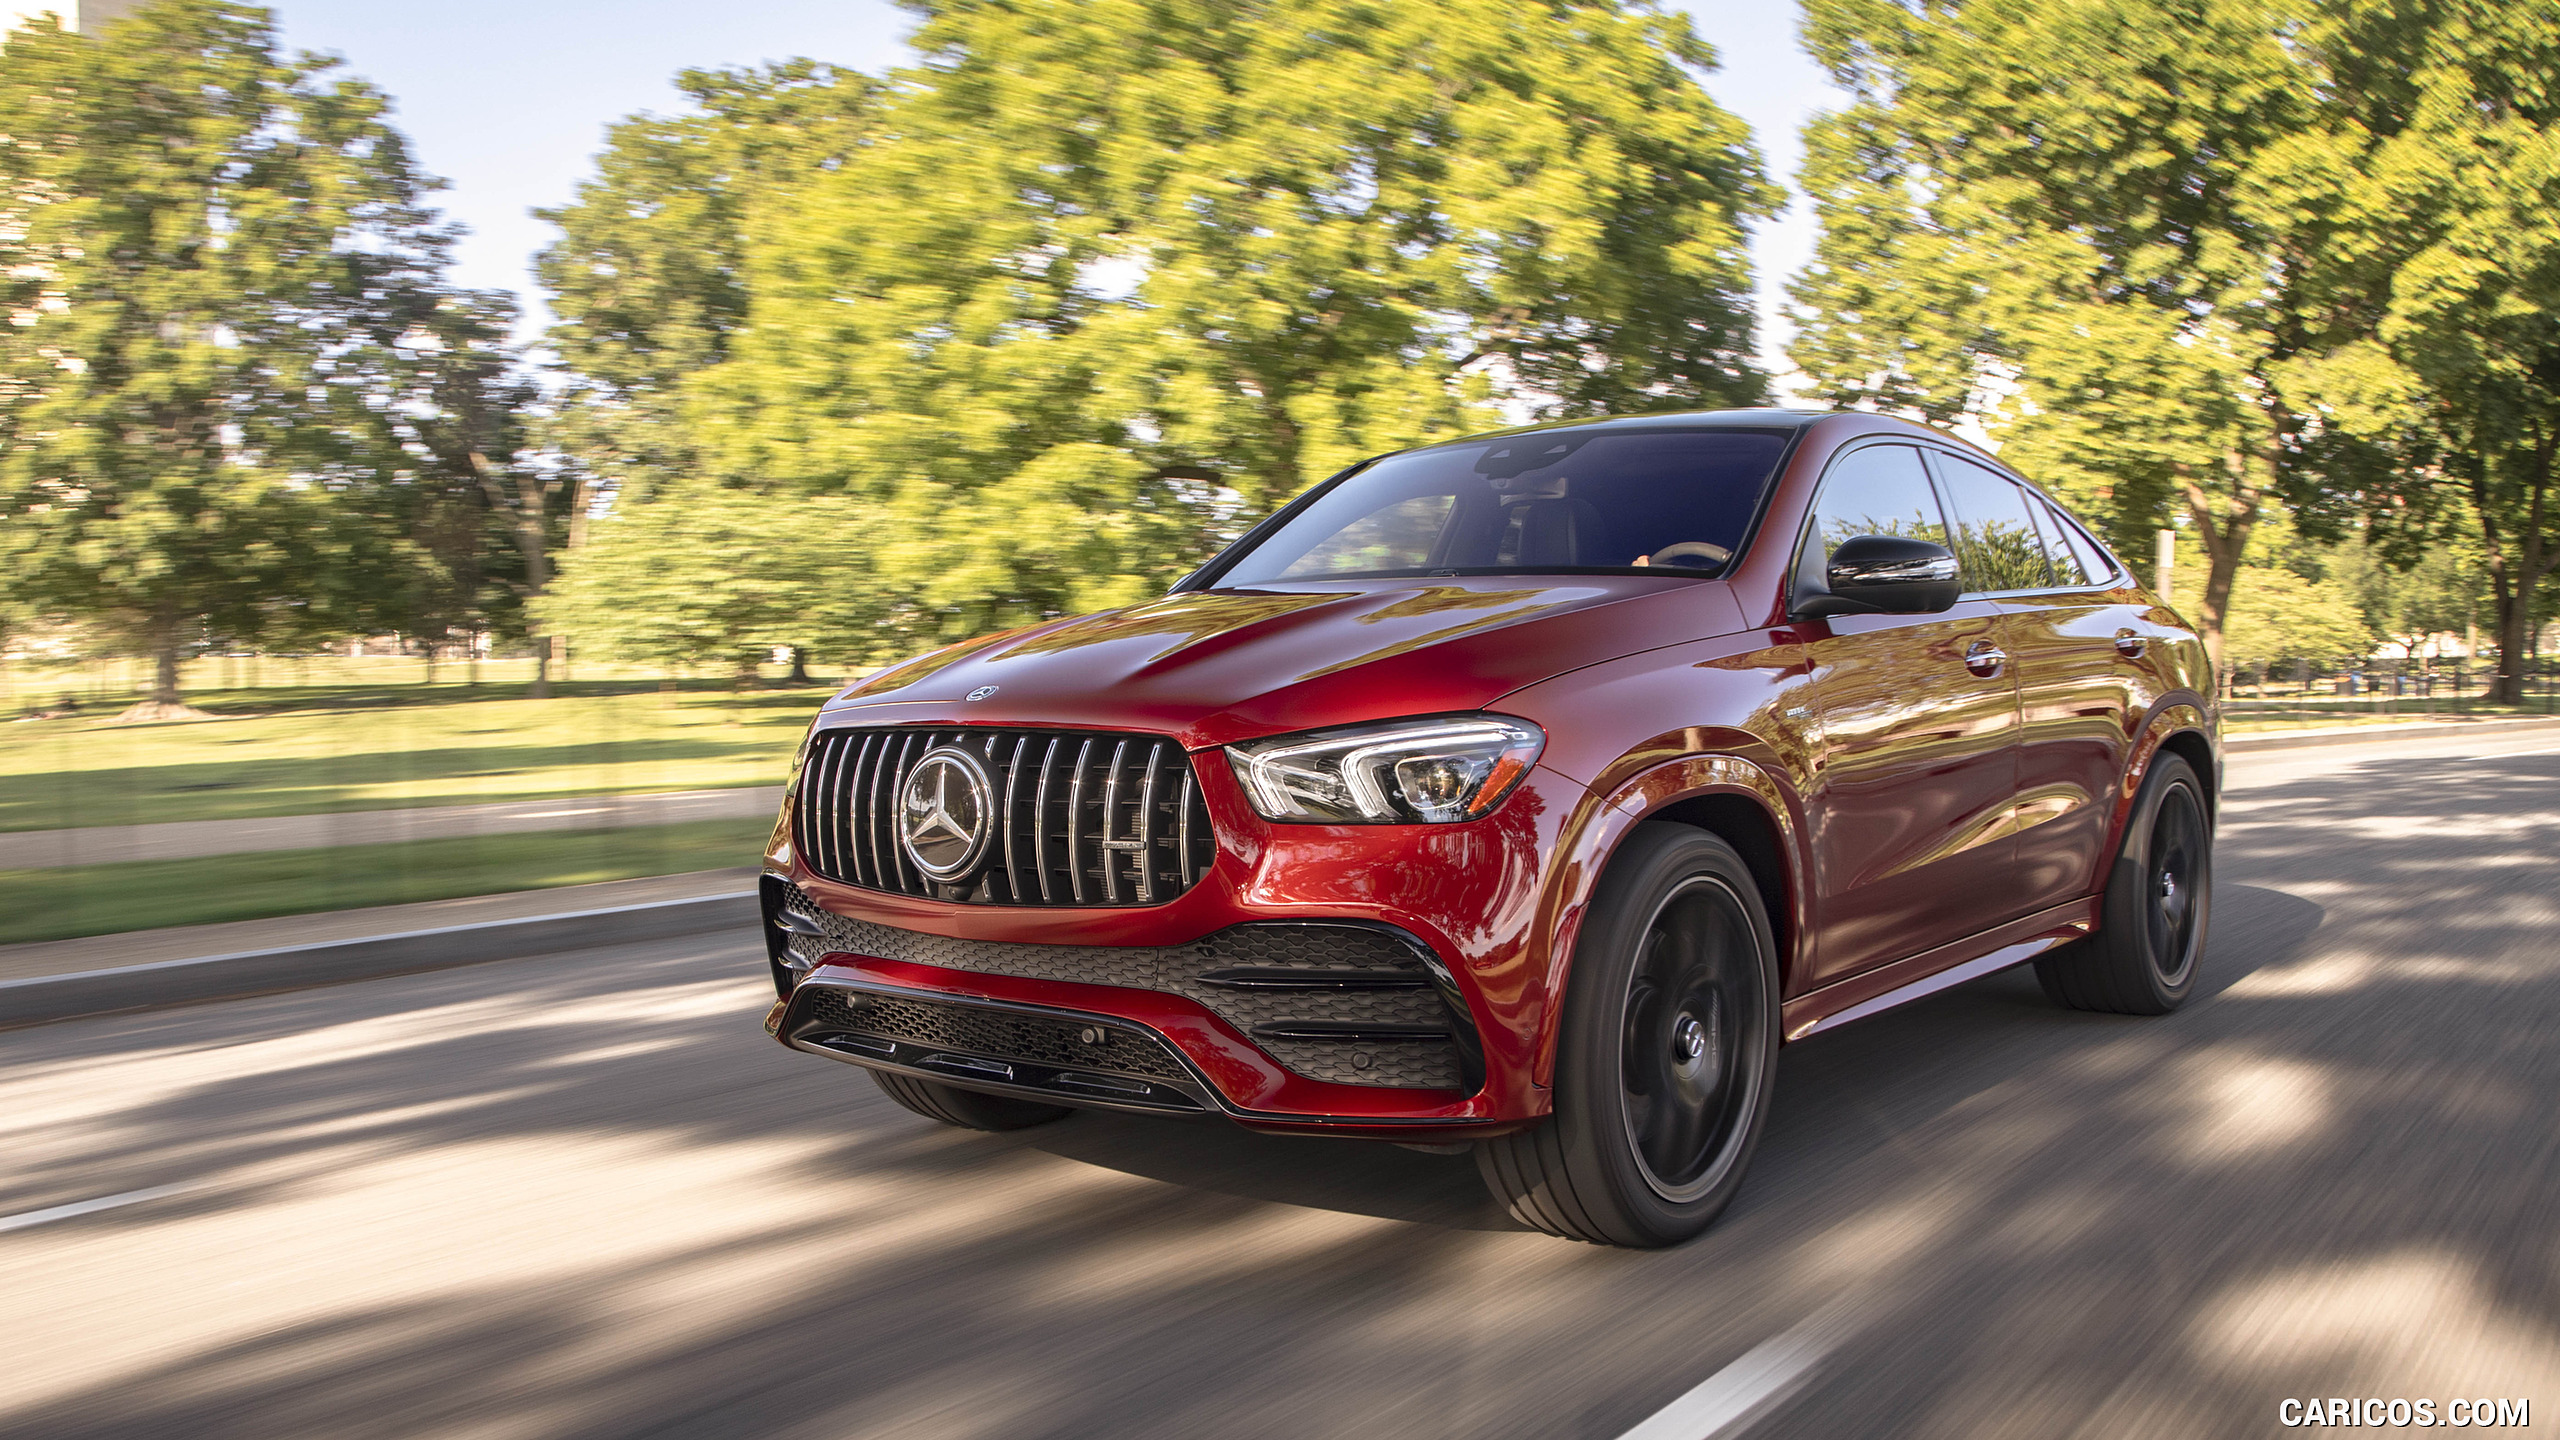 2021 Mercedes-AMG GLE 53 Coupe - Front Three-Quarter, #102 of 178